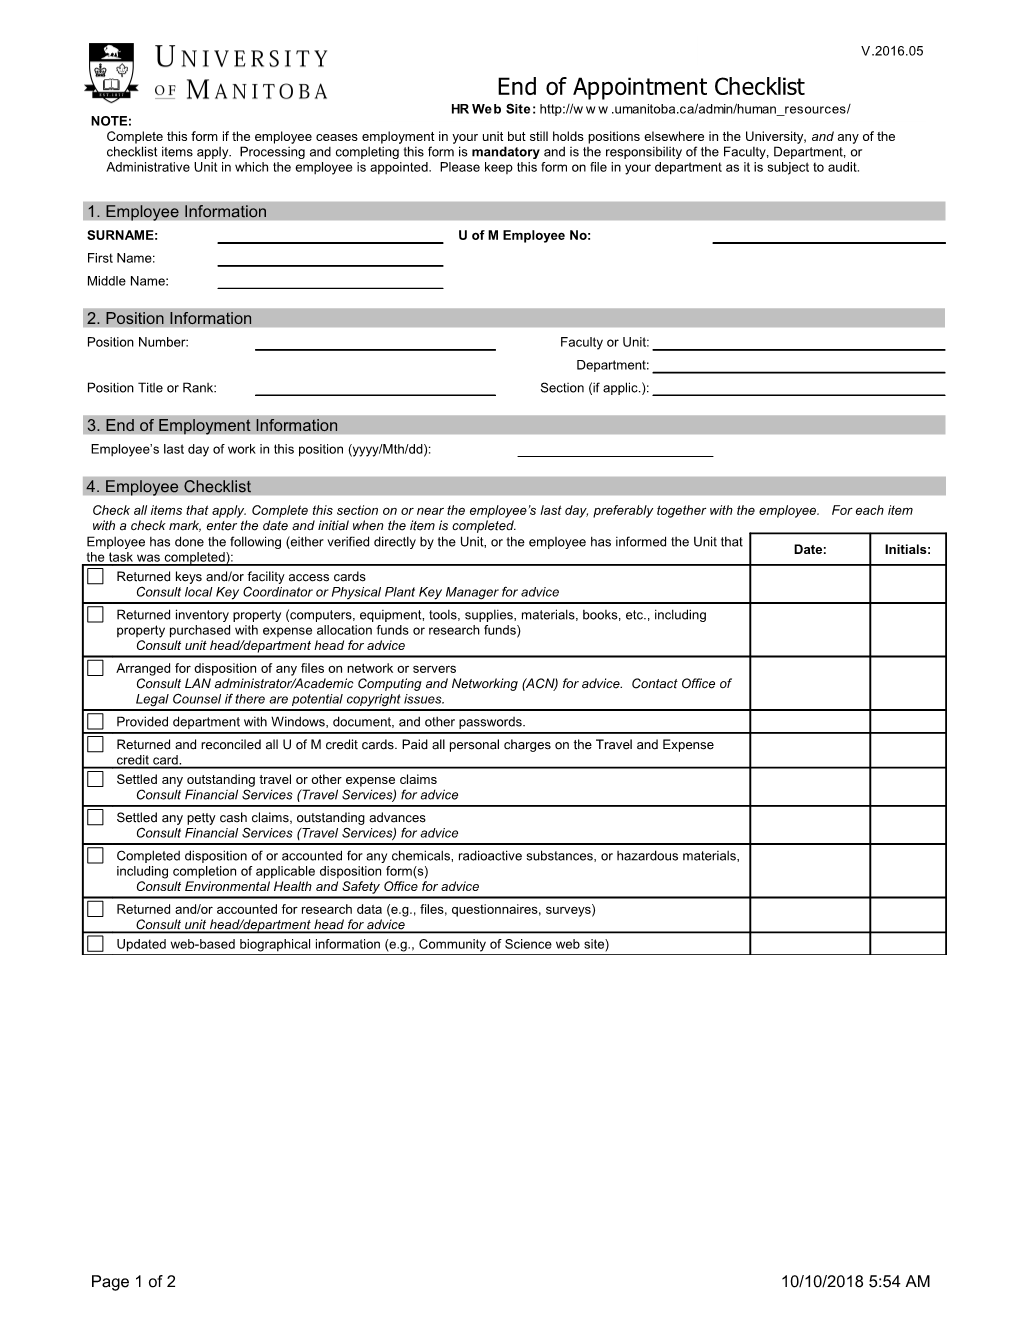 Complete This Form If the Employee Ceases Employment in Your Unit but Still Holds Positions